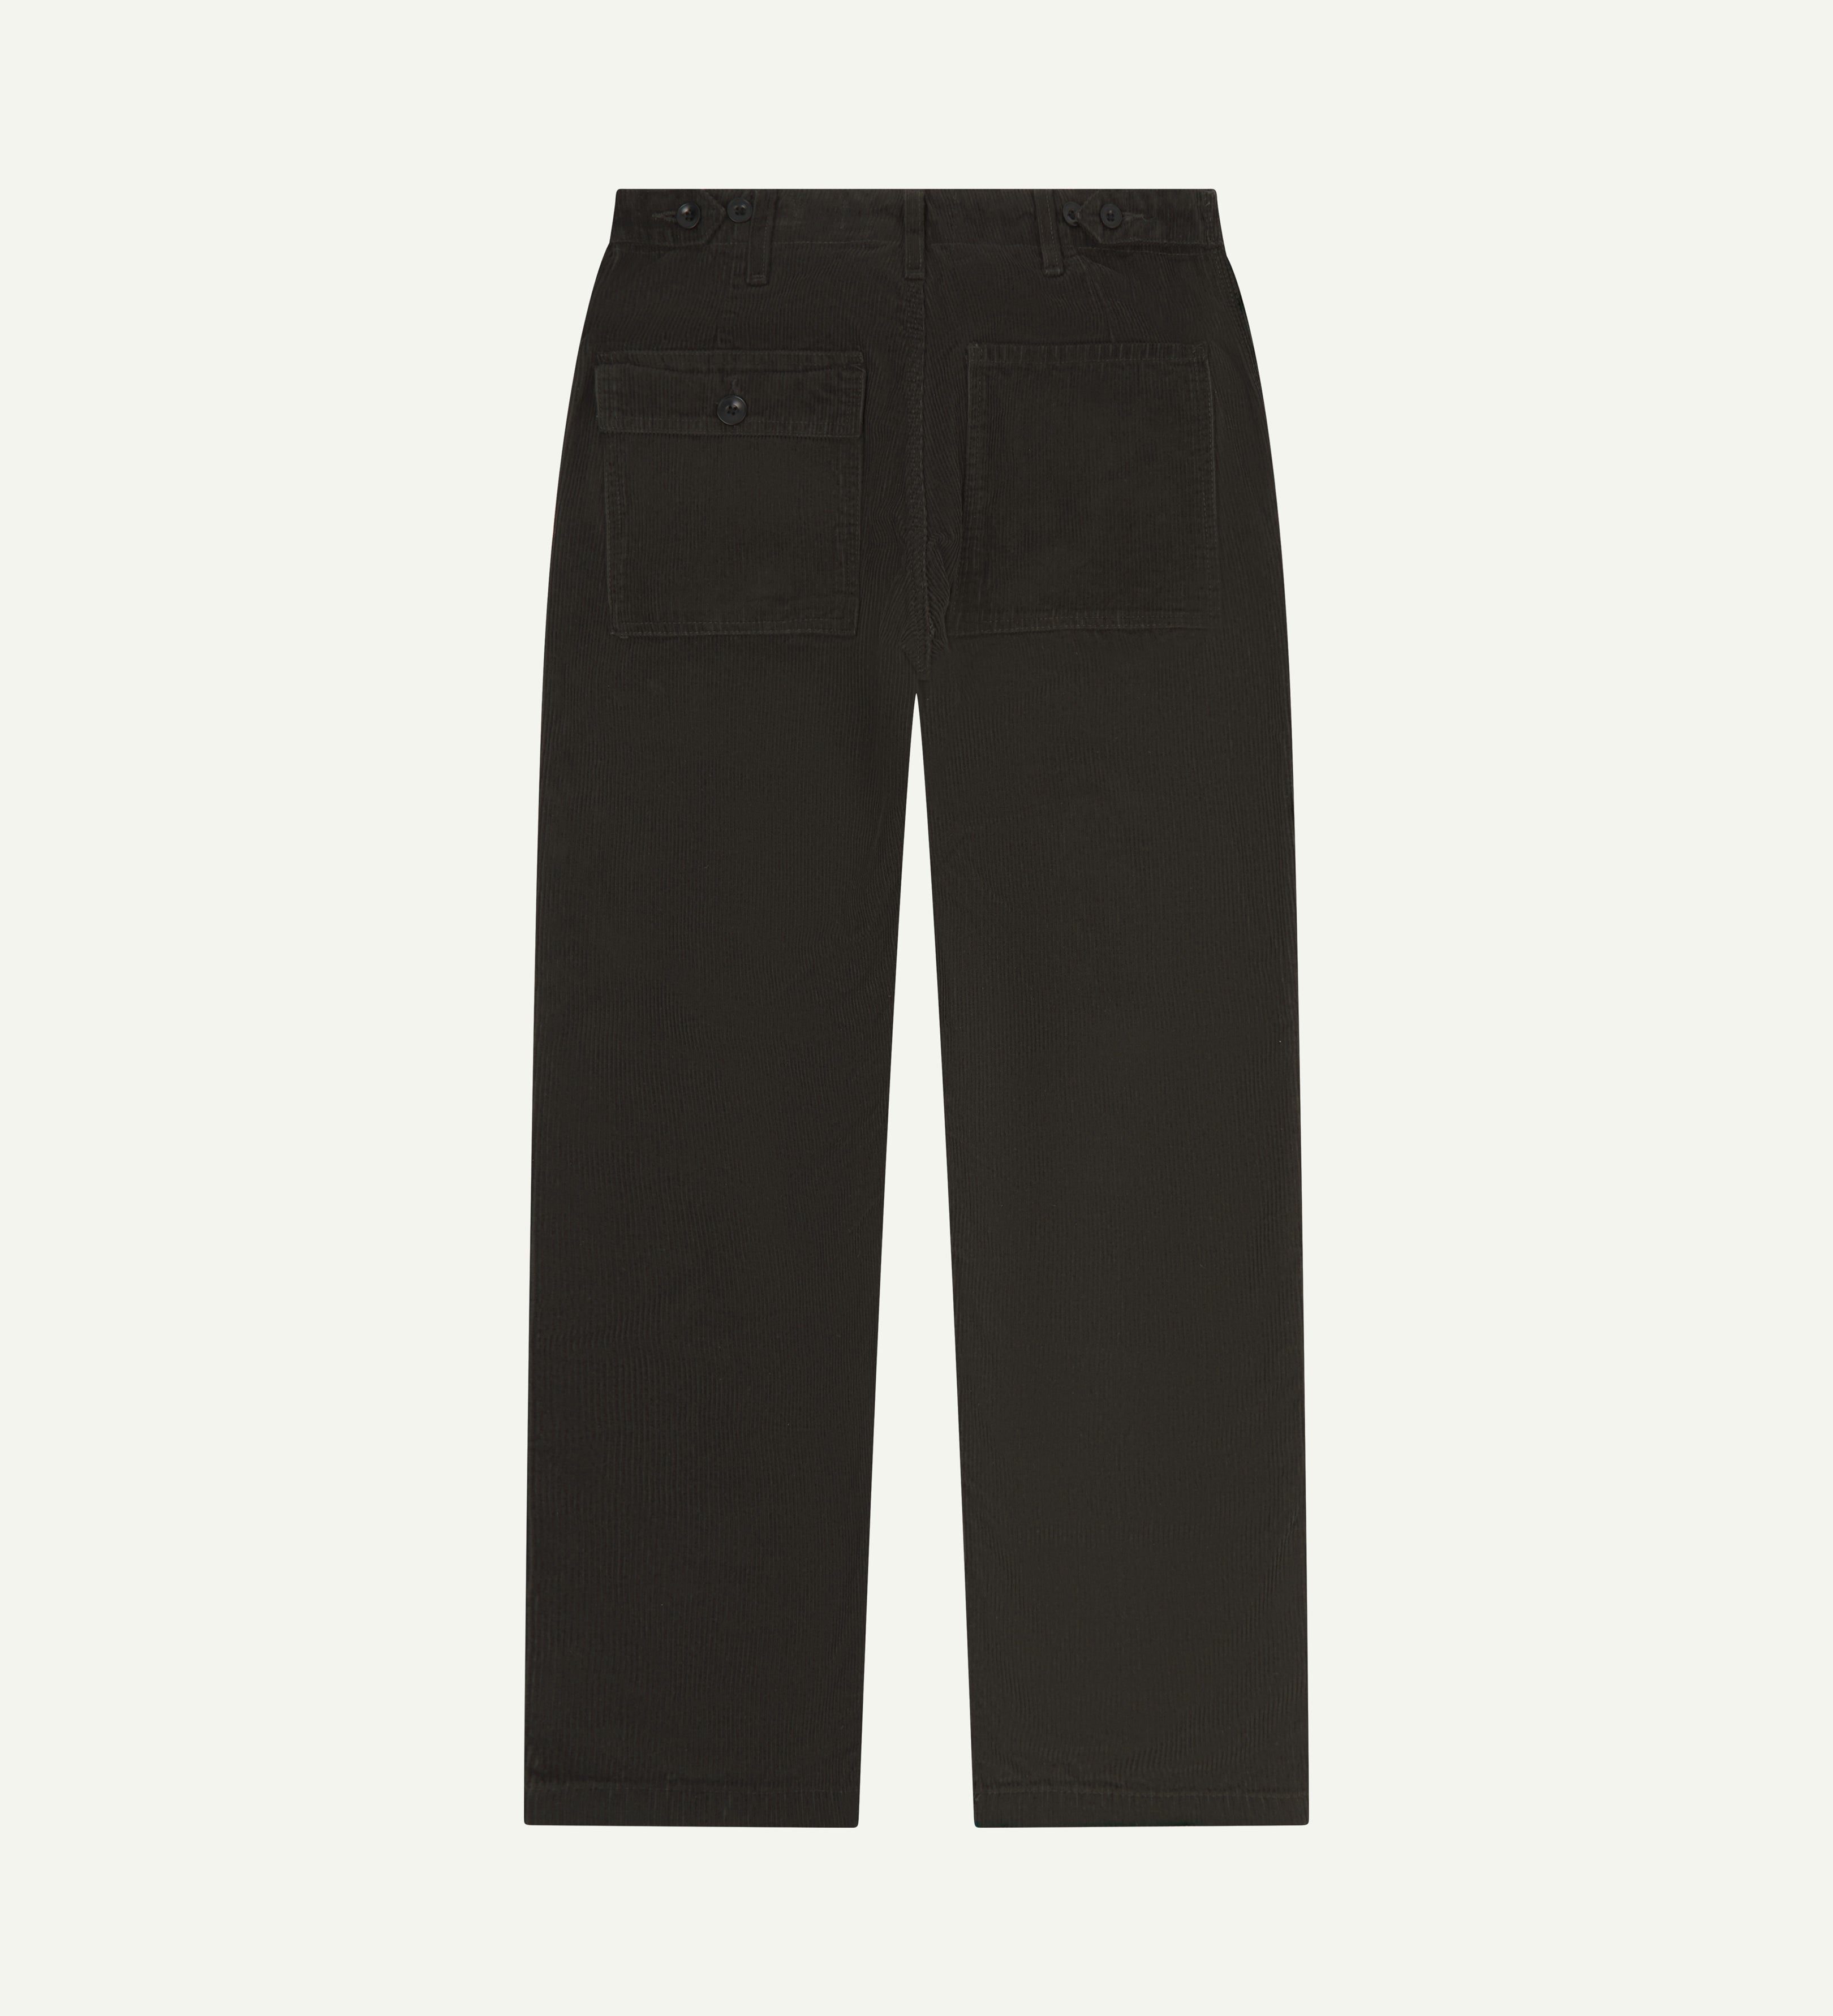 Back flat shot of #5005 Uskees men's organic cord 'faded black' casual trousers